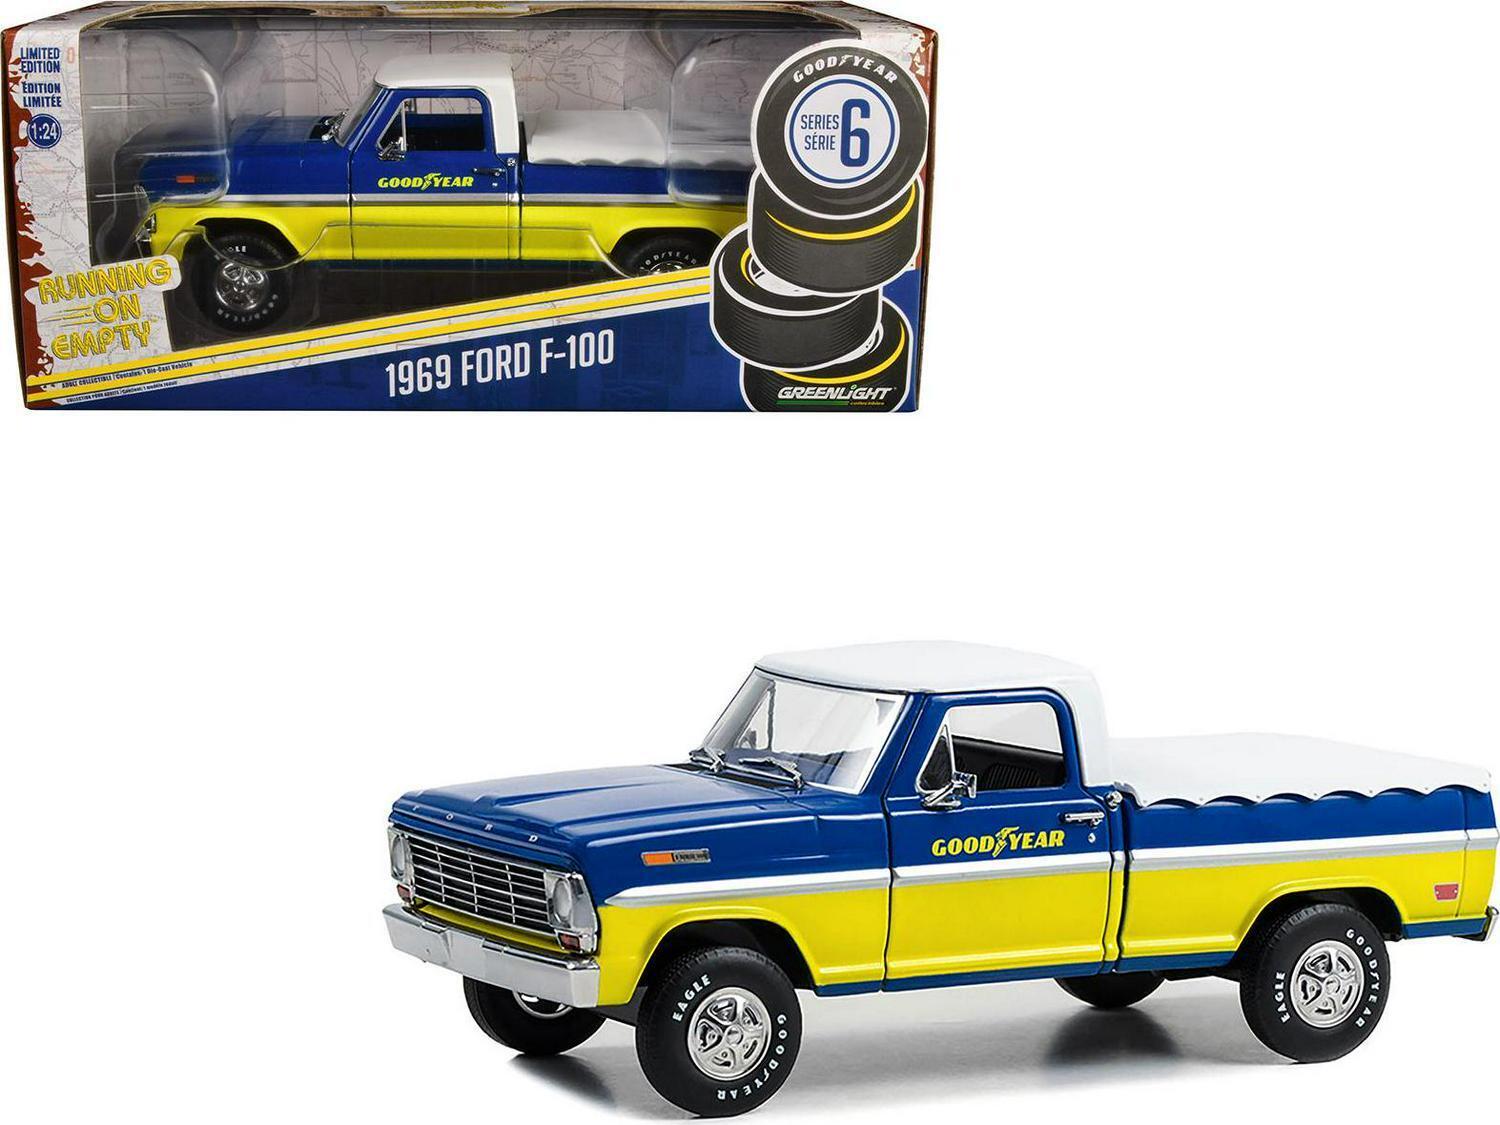 1969 Ford F-100 Pickup Truck Blue And Yellow With White Top And Bed Cover Tires